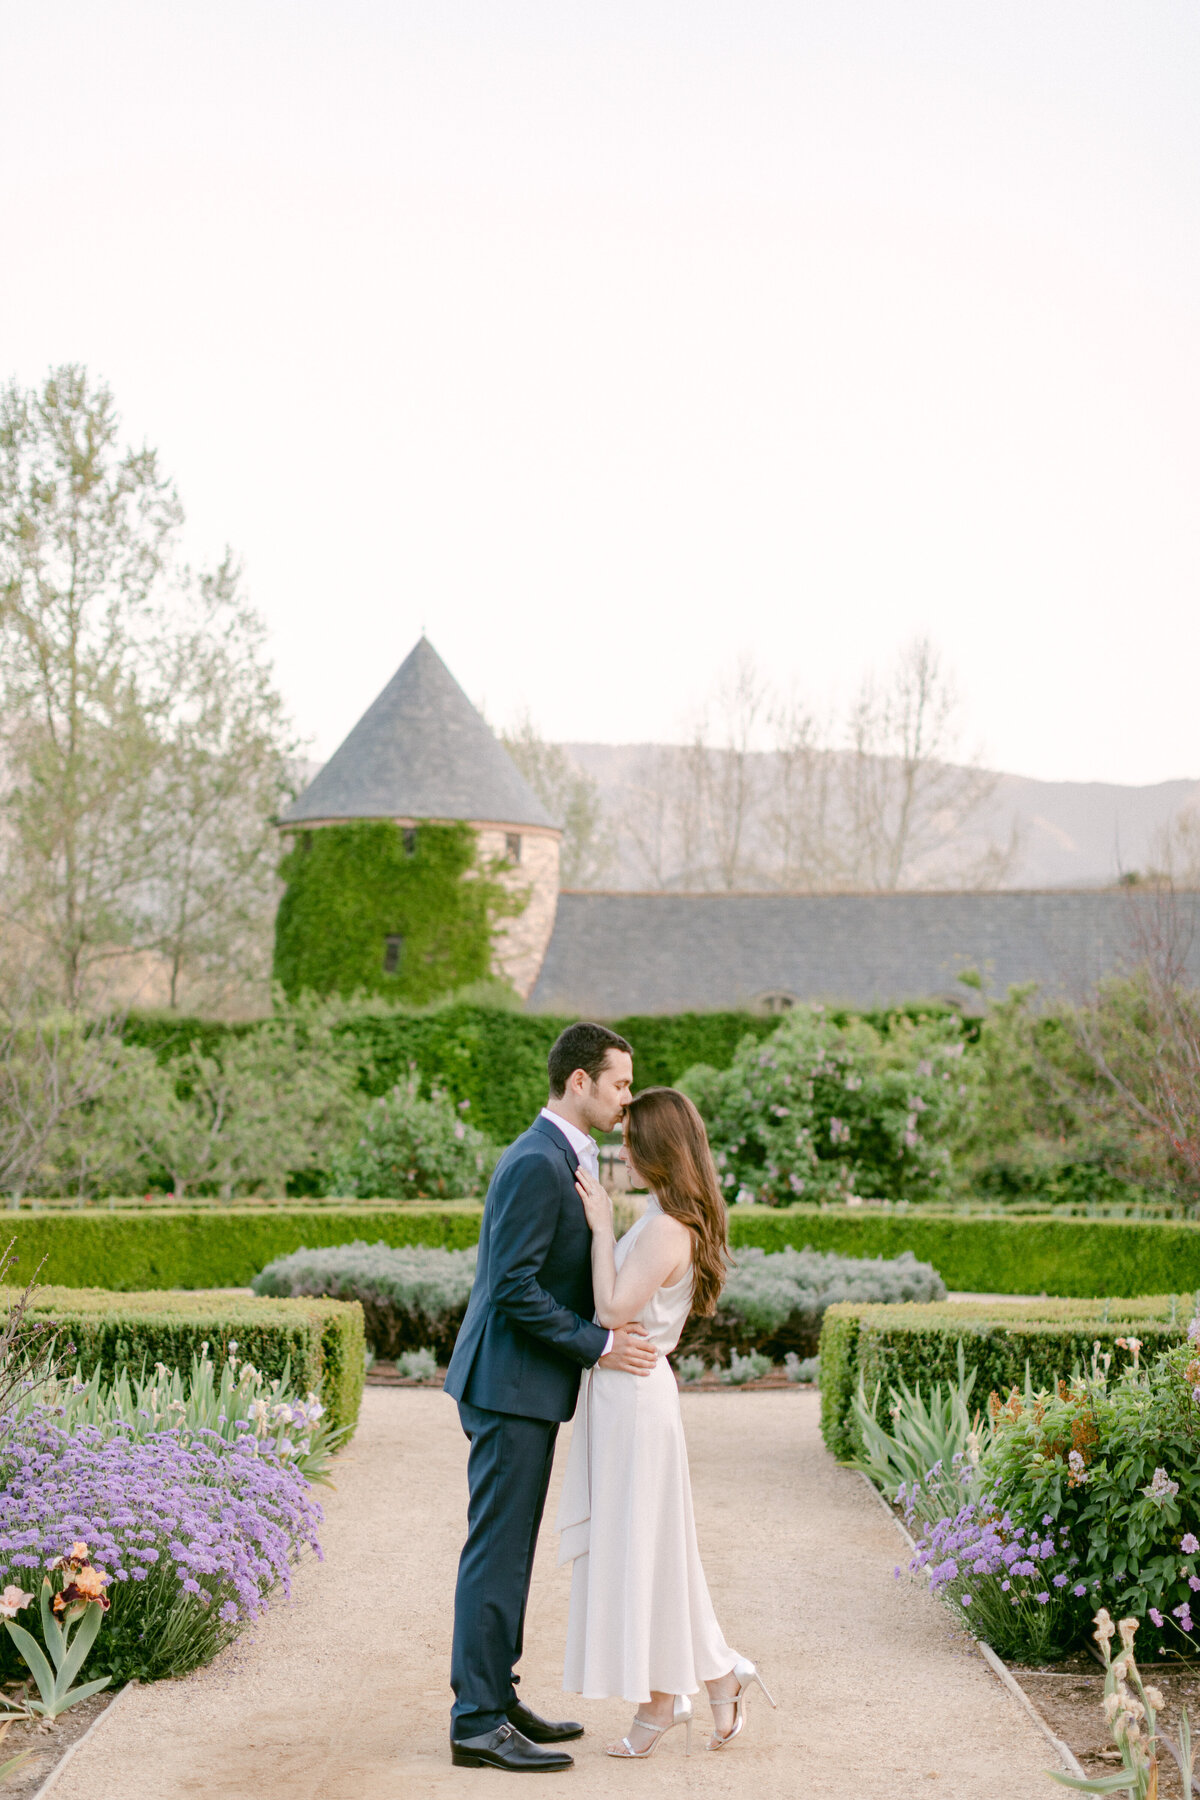 Groom-to-be kisses his bride's forehead in outdoor gardens